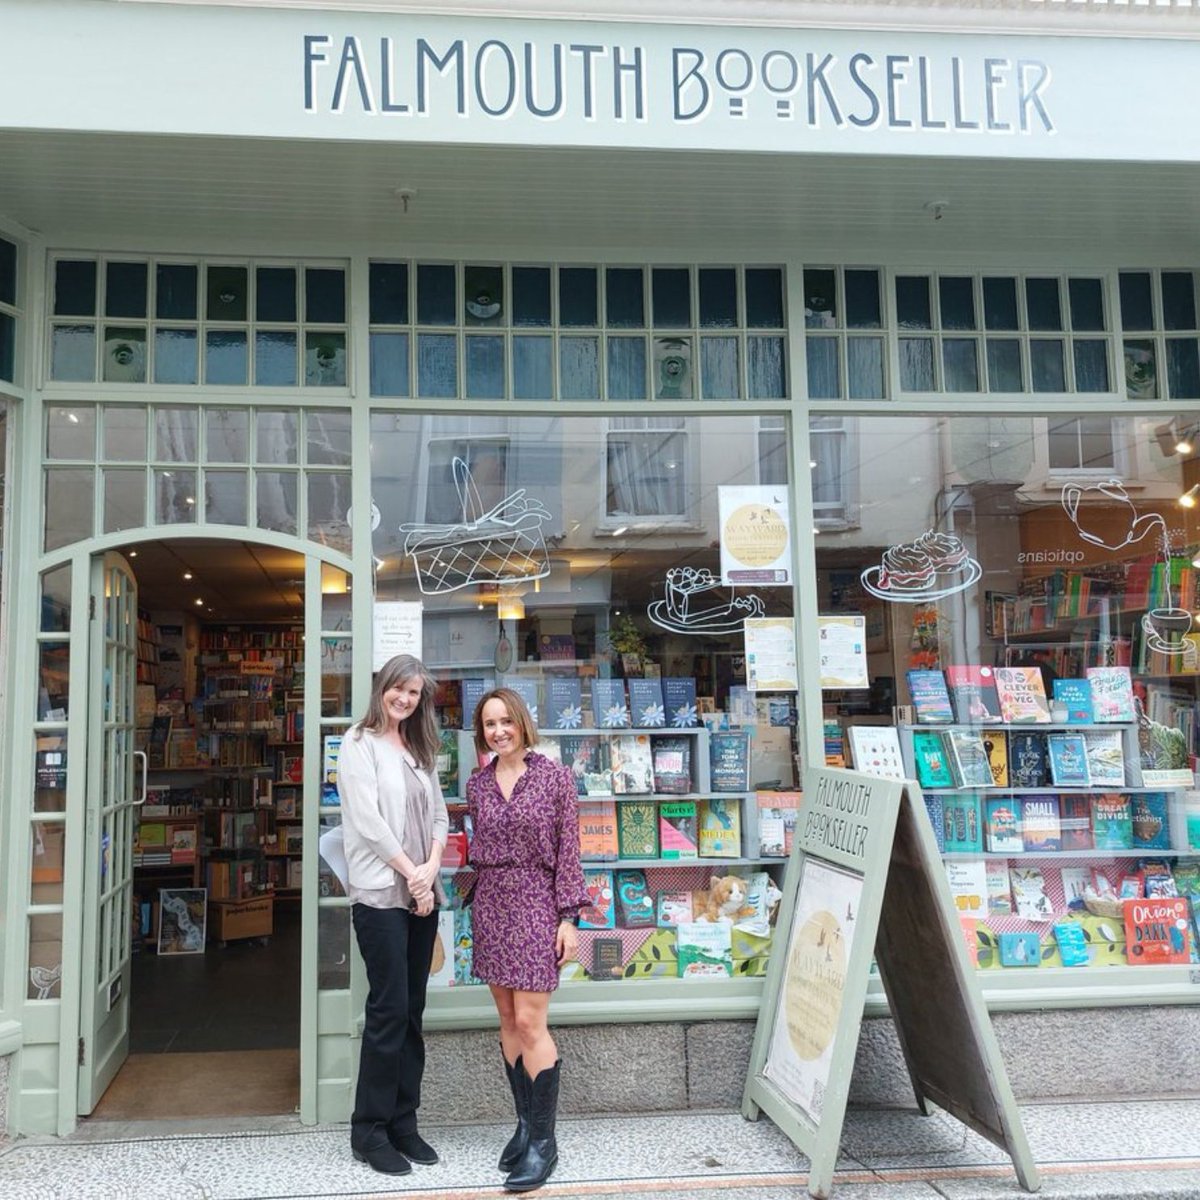 ✨Thank you so much to @falmouthbooks 🌼 for hosting a book launch with author/editor @EmmaTimpany and illustrator @sarahgalerie 📖 If you're local get your copy whilst stock lasts! #bookshopping #independentbookshops